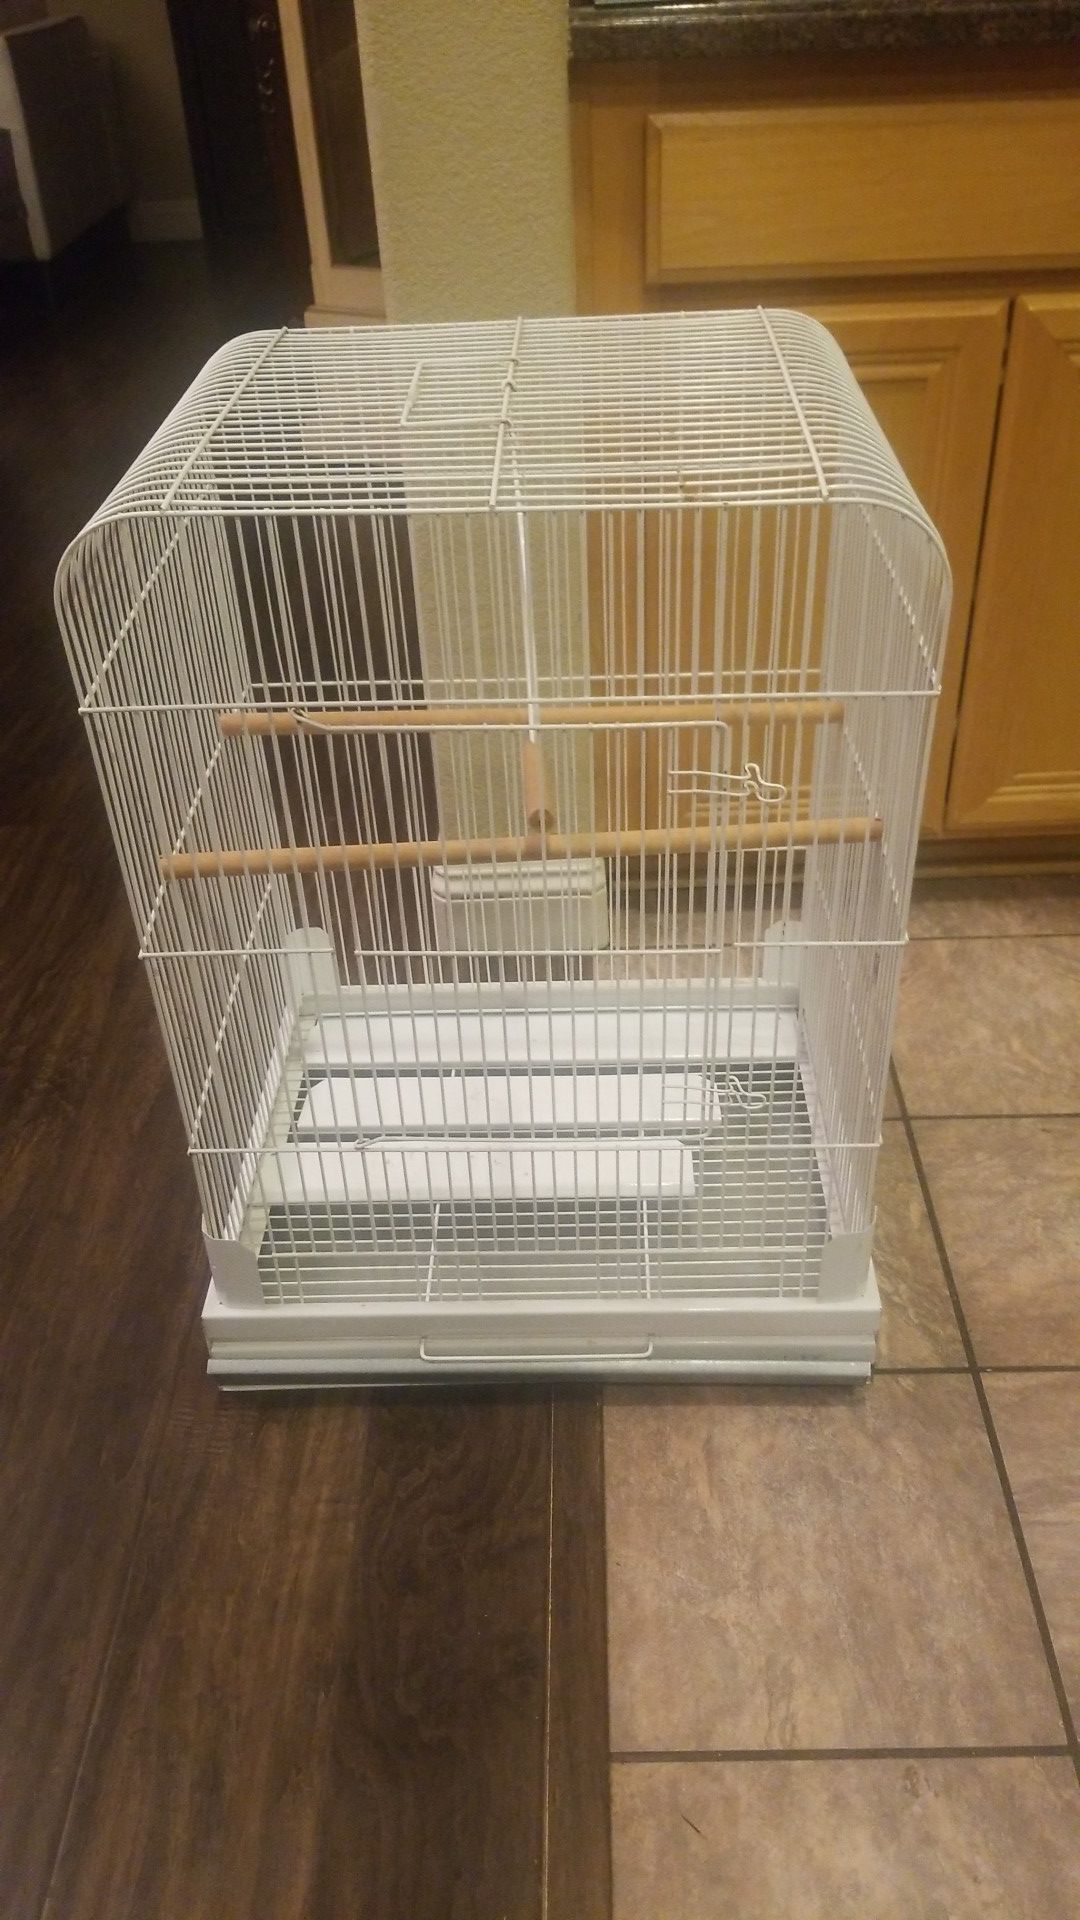 Snow white bird cage ready and available